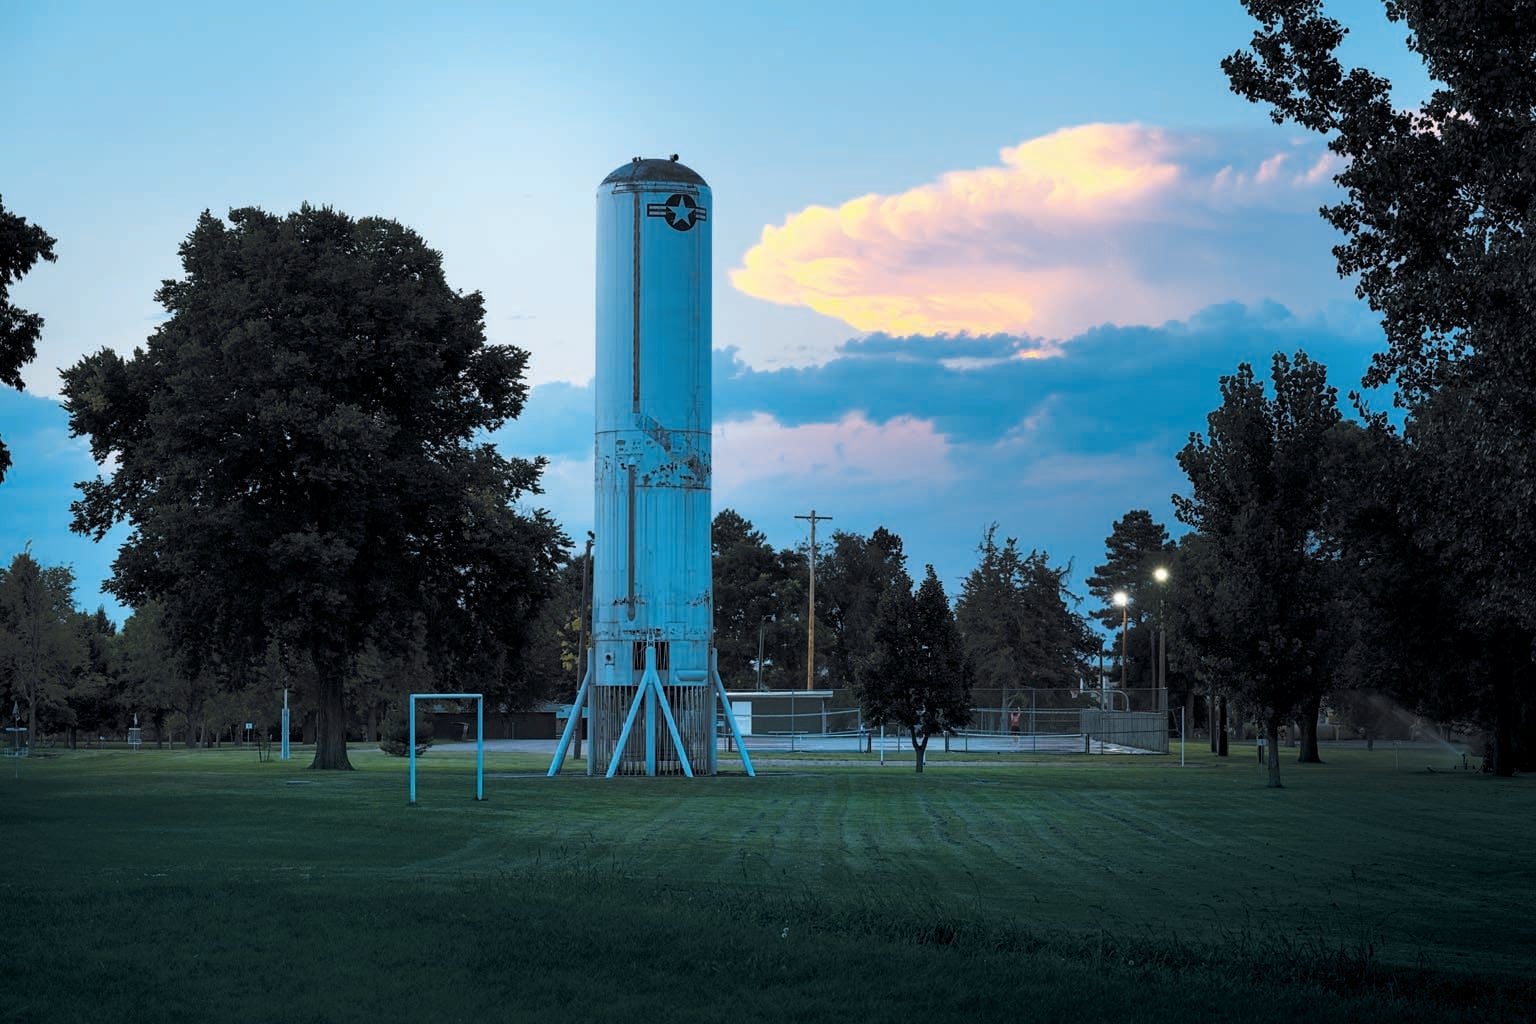 For decades a Titan missile—sans top, which fell off—stood in a town park in Kimball, Neb. The missile was removed in September 2023 after it was deemed a safety hazard.